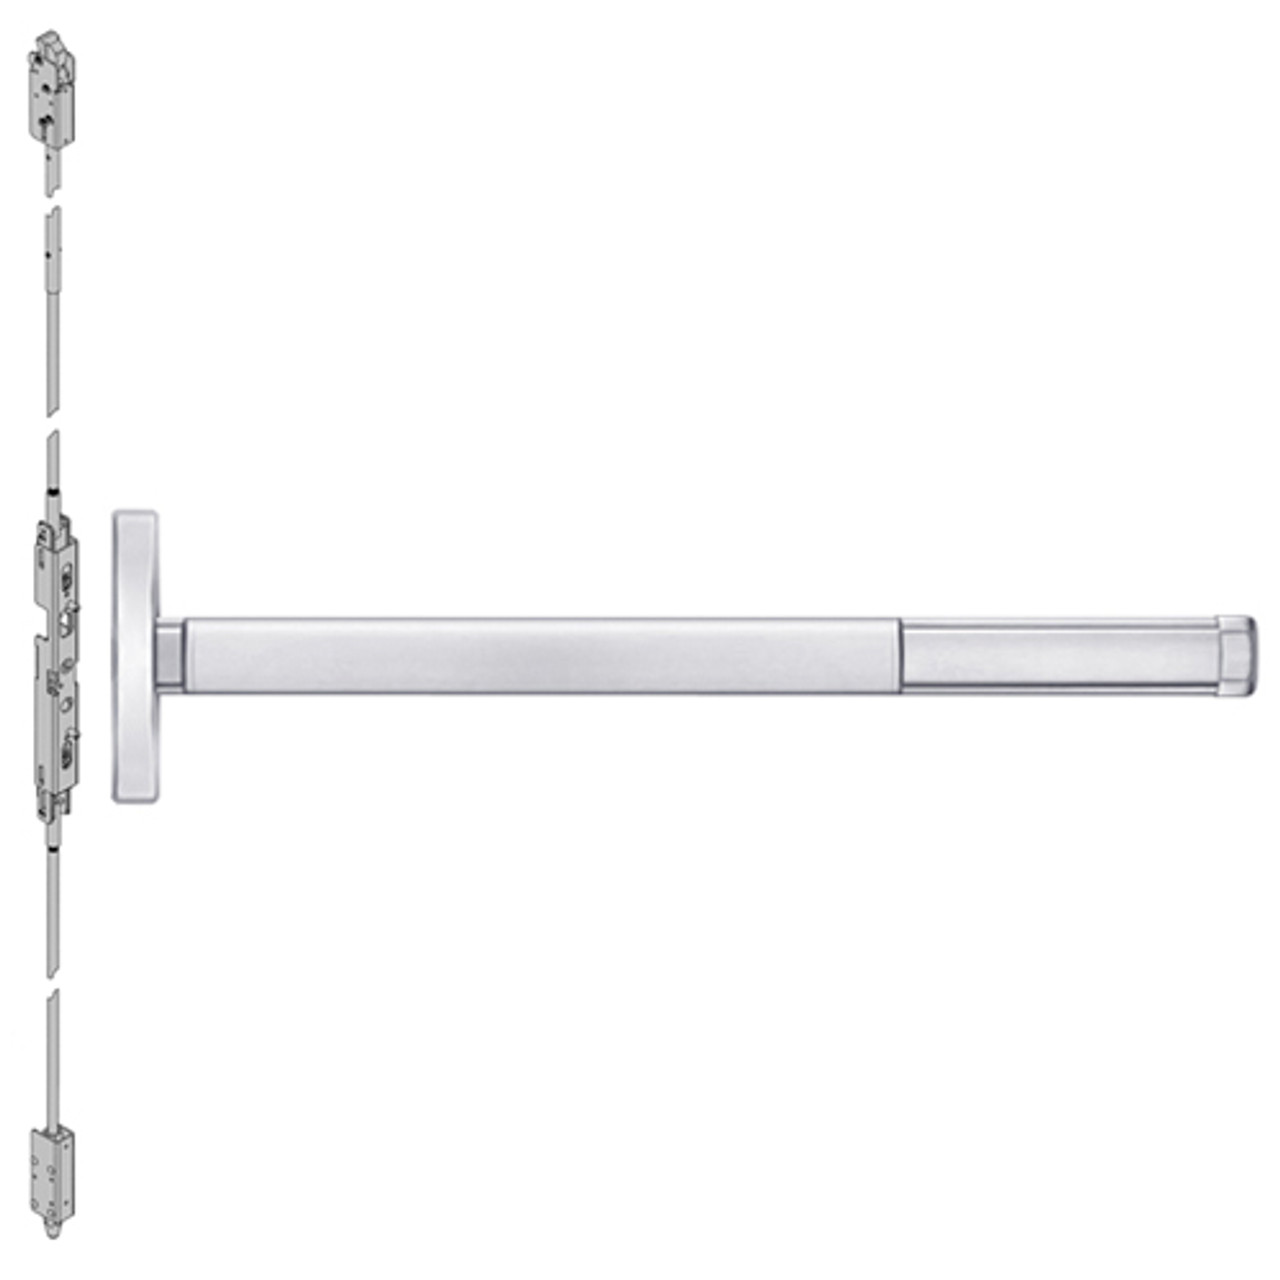 2608CD-625-48 PHI 2600 Series Non Fire Rated Concealed Vertical Rod Exit Device Prepped for Key Controls Lever with Cylinder Dogging in Bright Chrome Finish